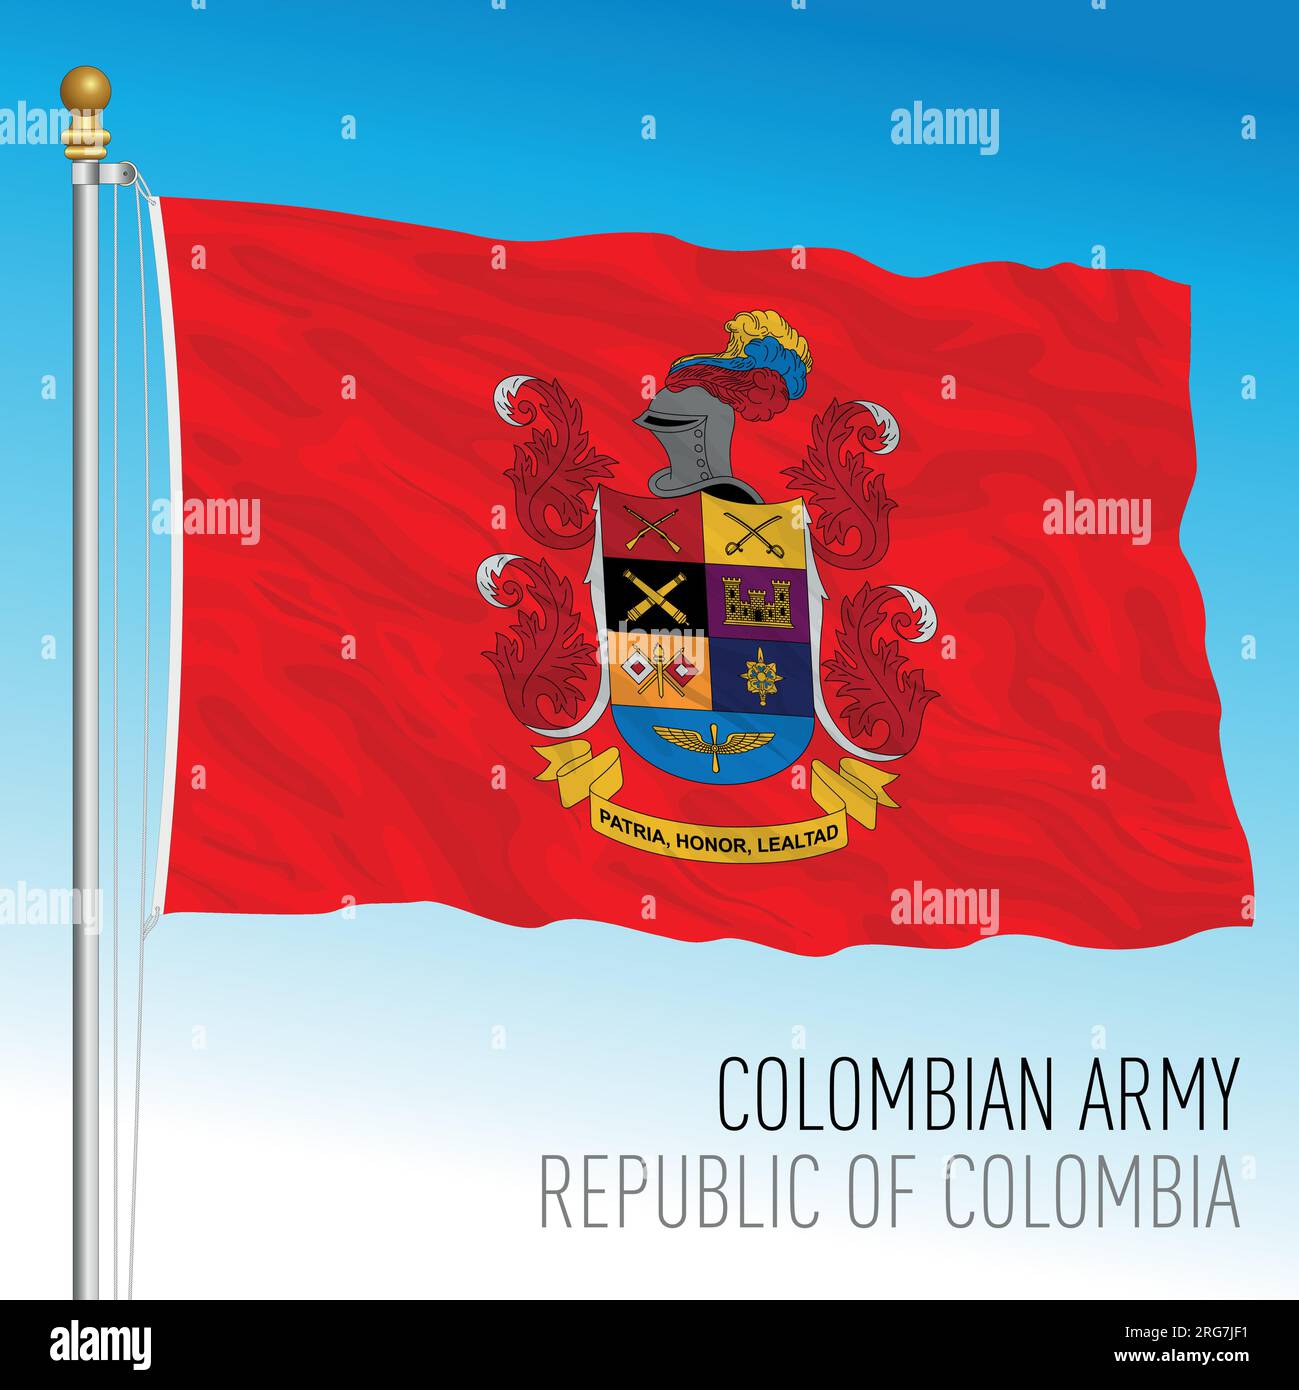 Colombian Army waving flag, Republic of Colombia, south america, vector illustration Stock Vector